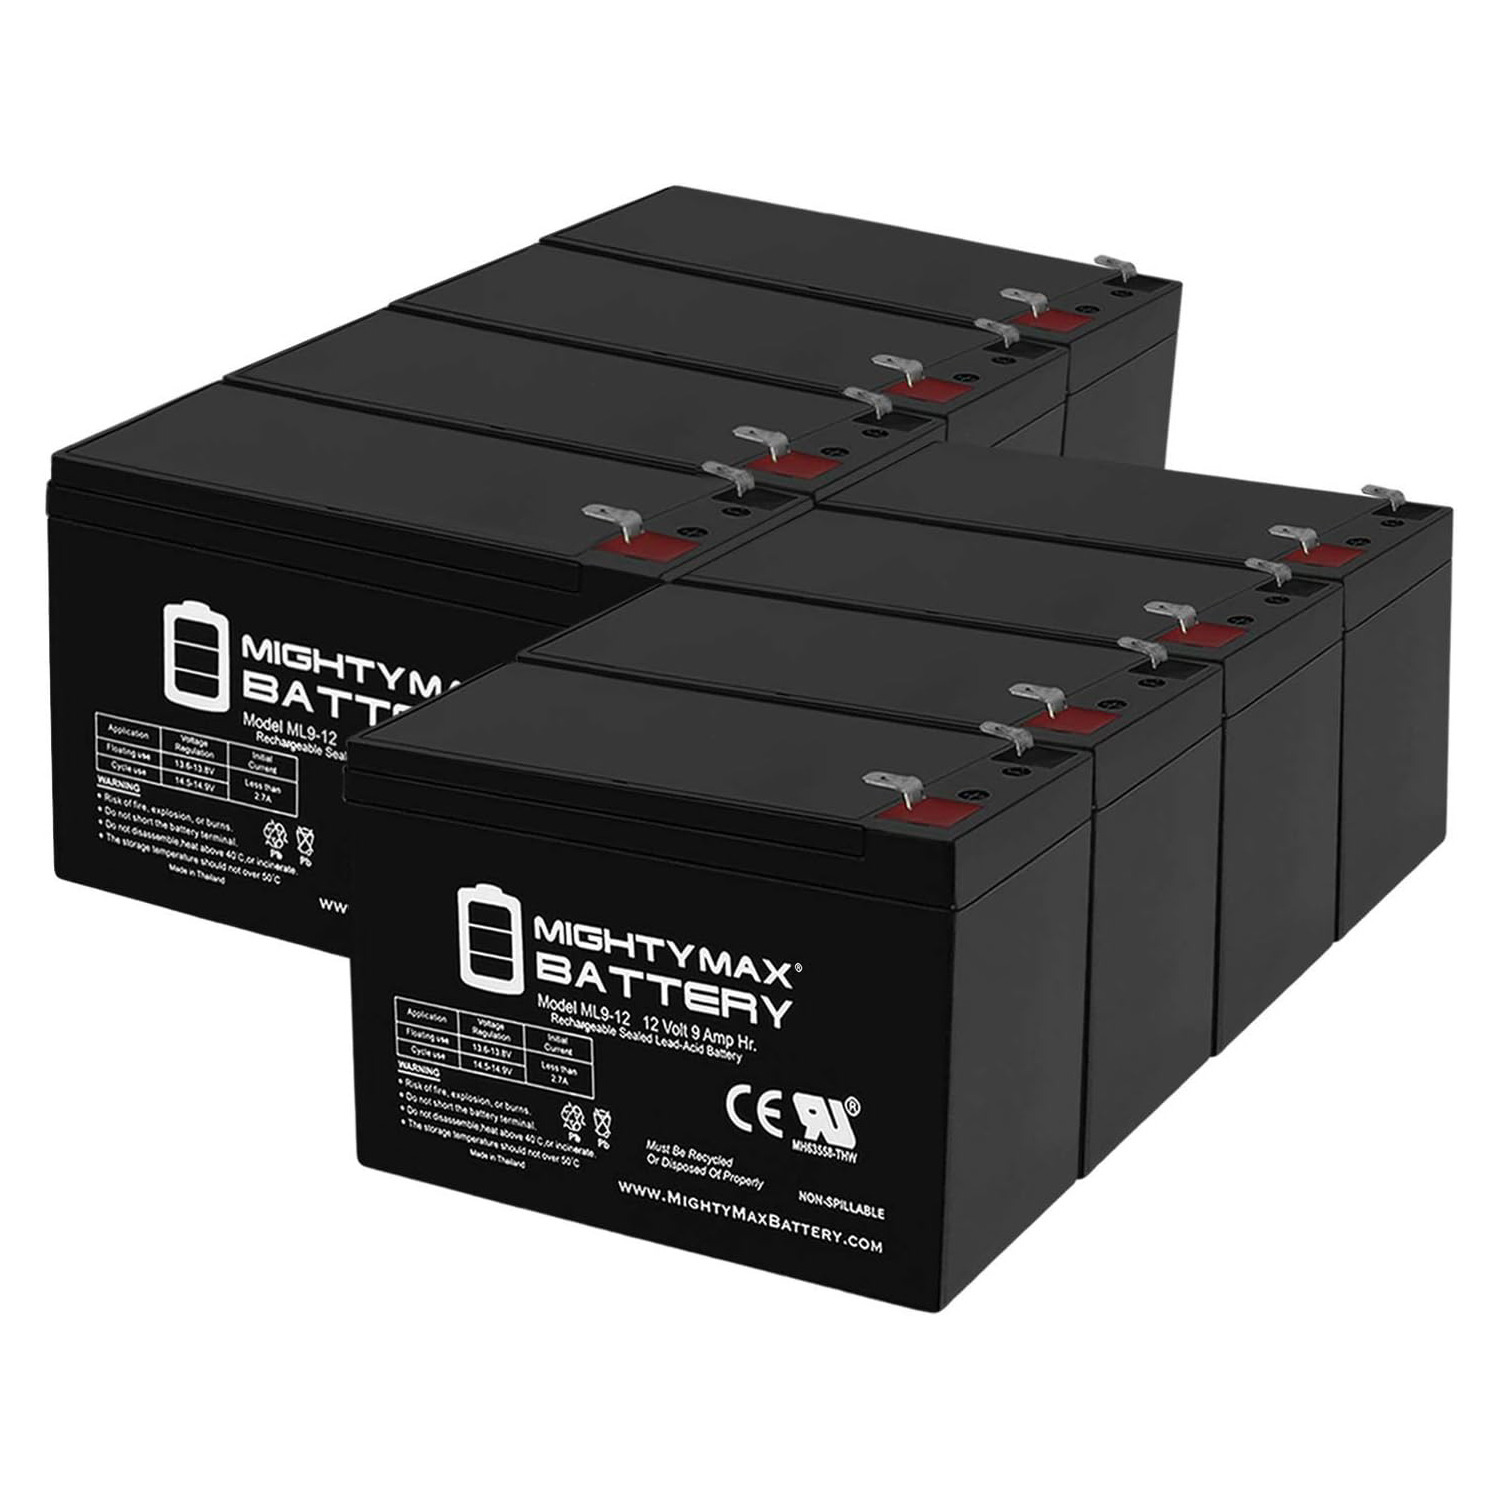 Altronix SMP3PMCTXPD16CB 12V, 9Ah Lead Acid Battery - 8 Pack